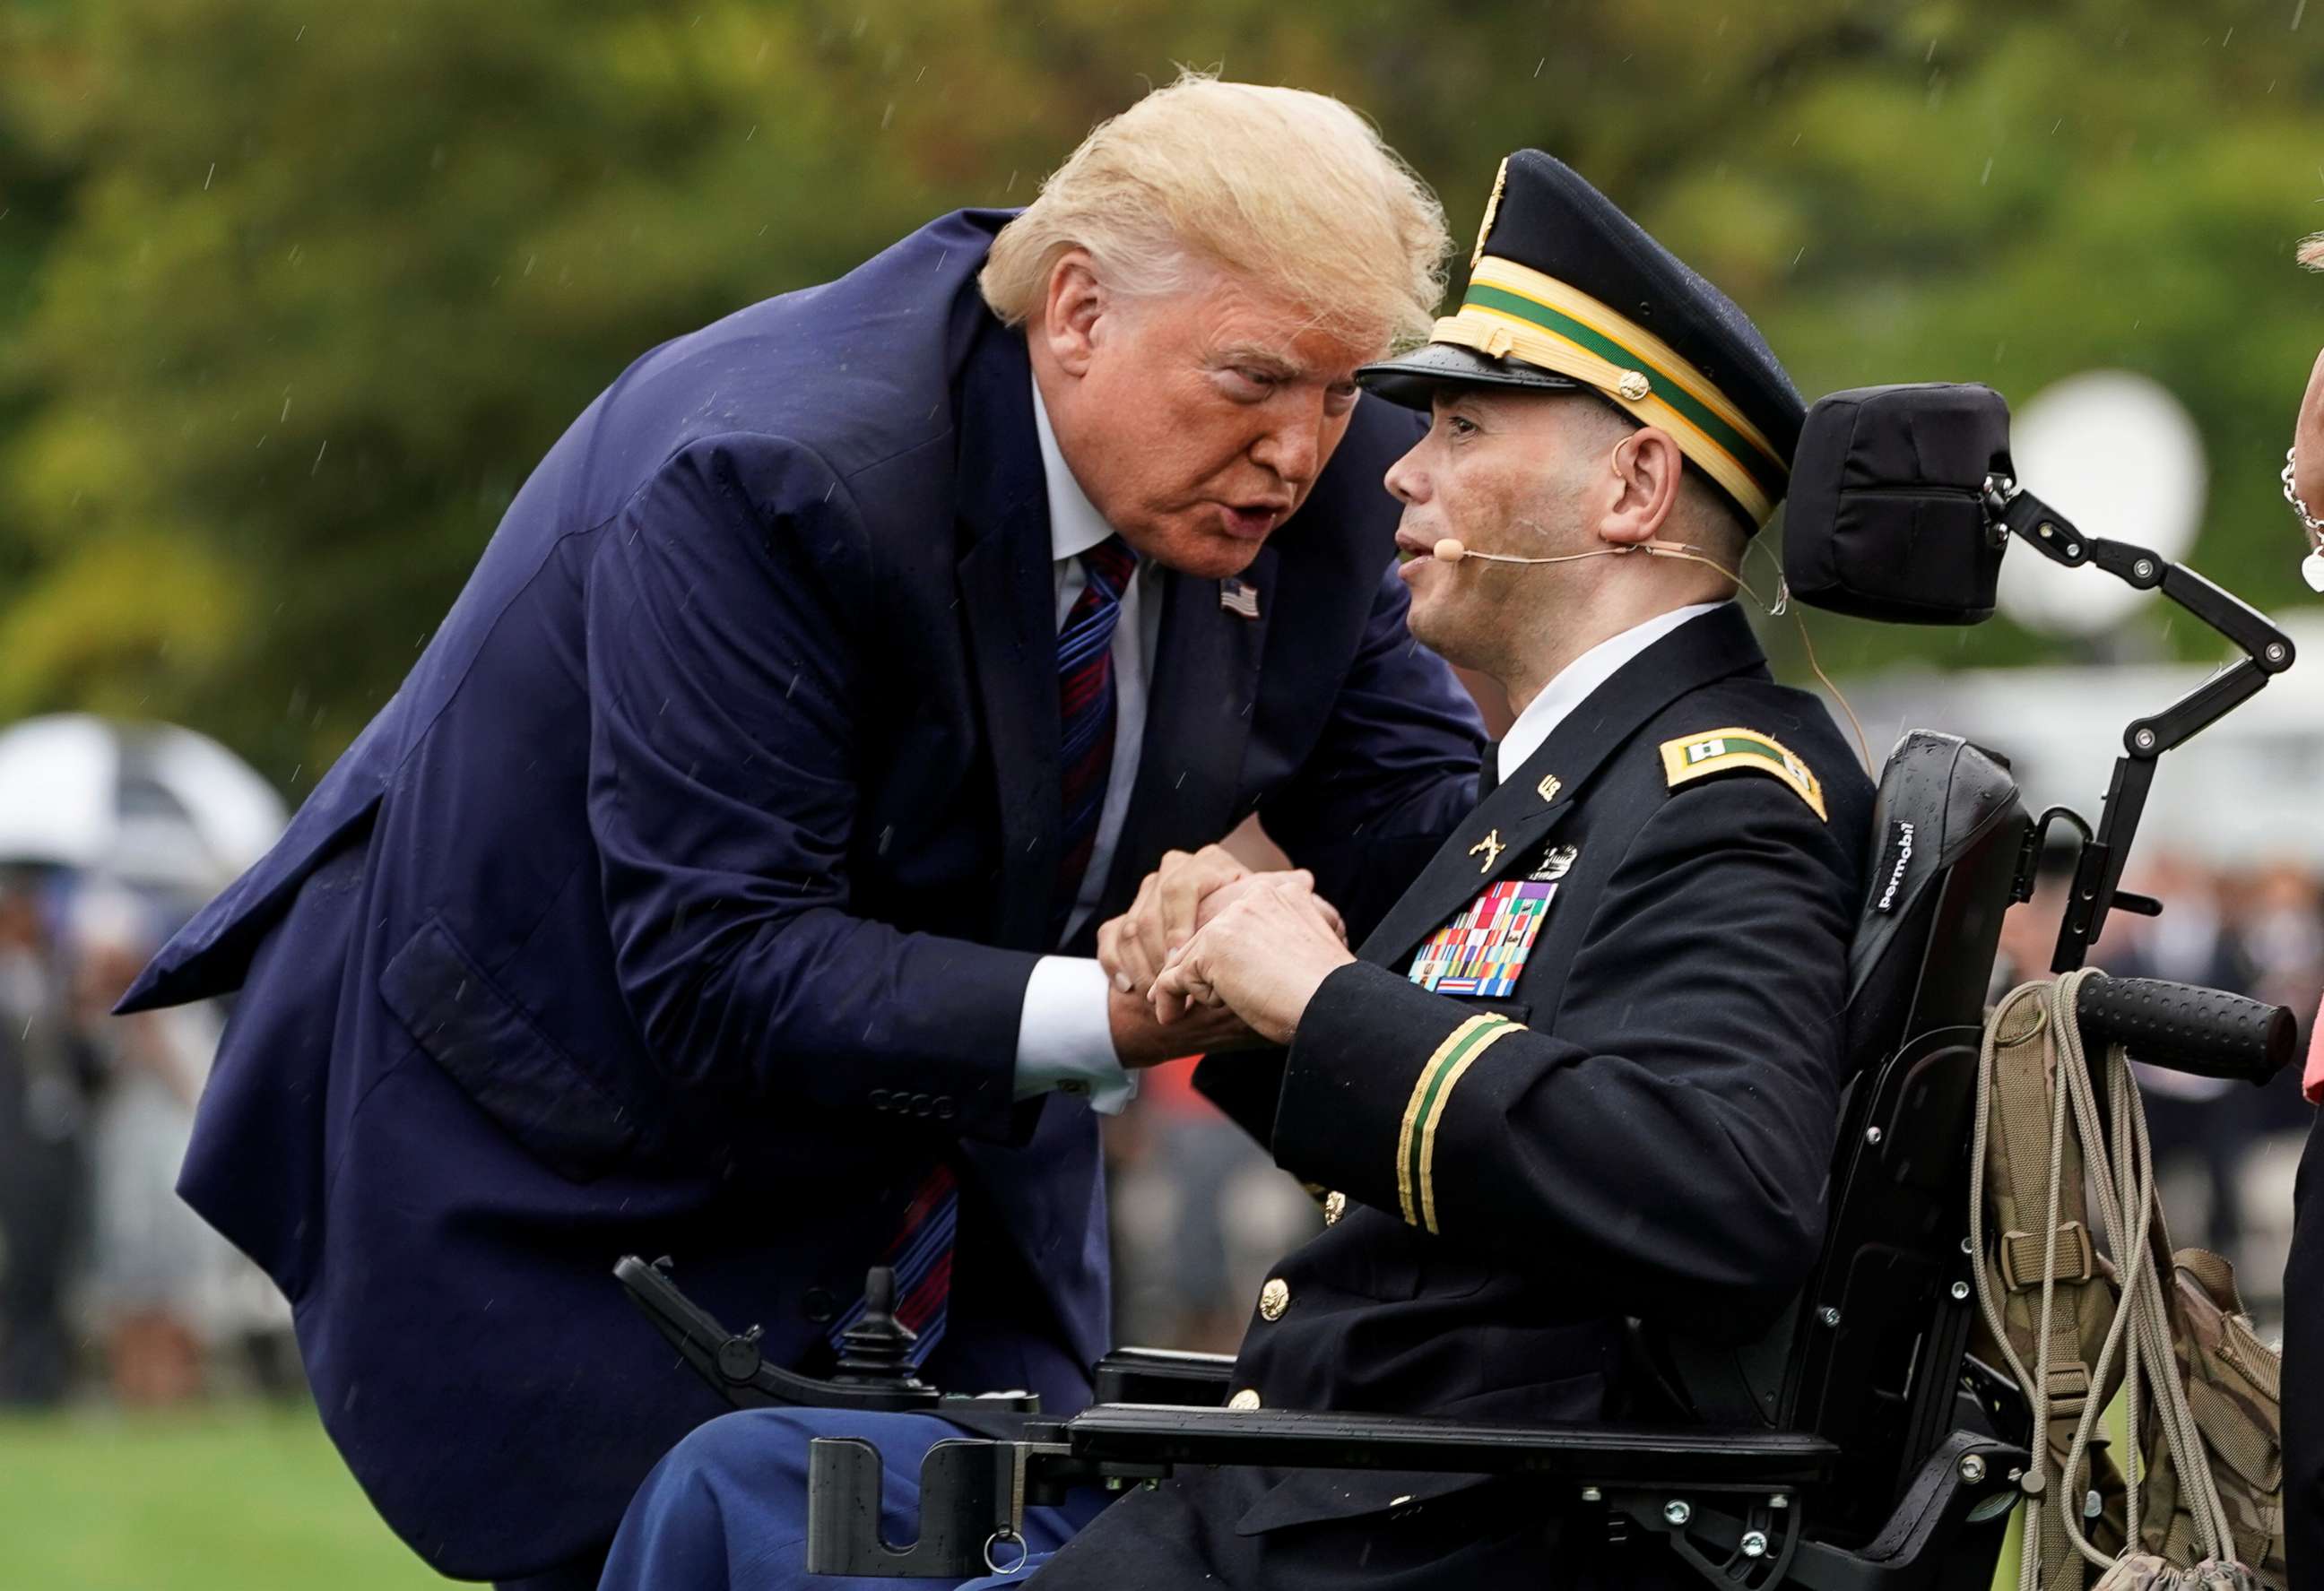 PHOTO: President Donald Trump greets Army Captain Luis Avila during a welcome ceremony in honor of new Joint Chiefs of Staff Chairman Army General Mark Milley at Joint Base Myer-Henderson Hall, Virginia, Sept. 30, 2019.